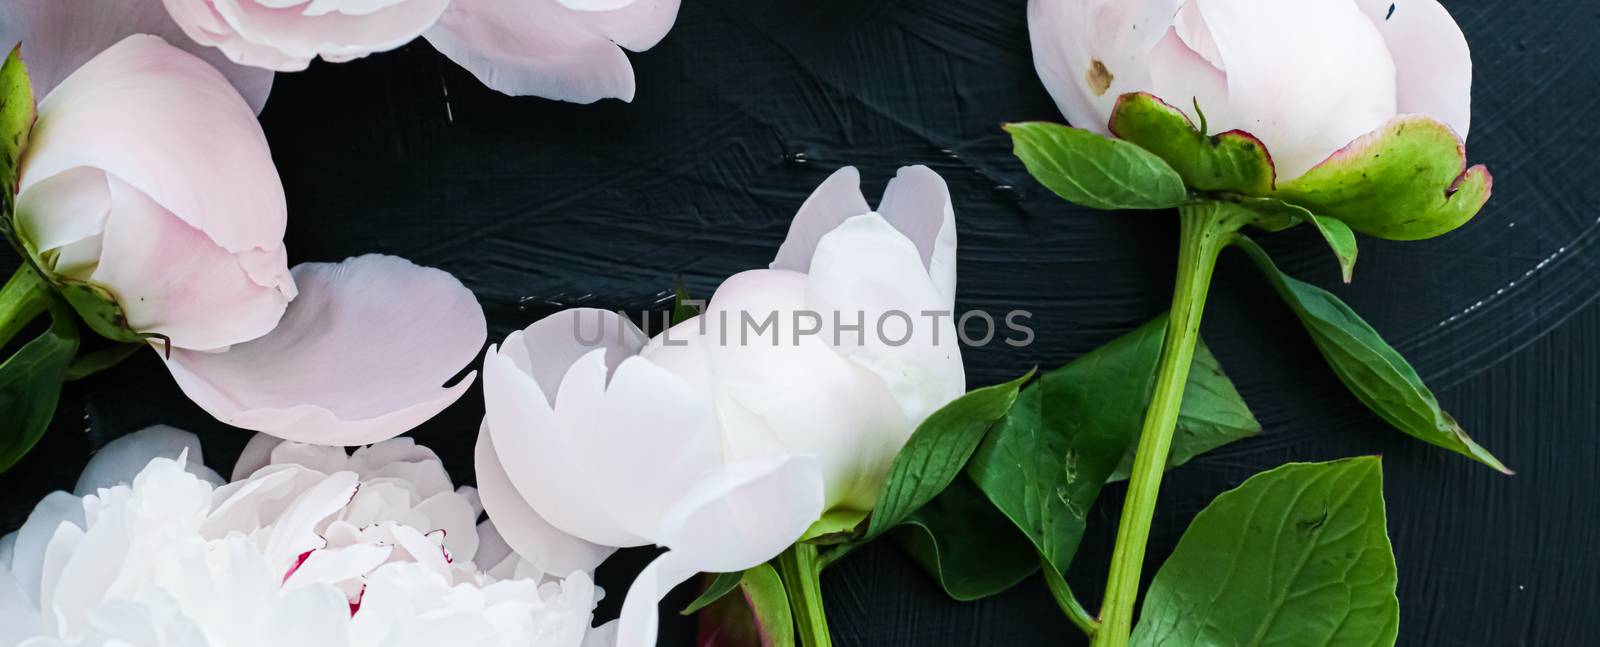 Blooming peony flowers as floral art background, botanical flatlay and luxury branding design